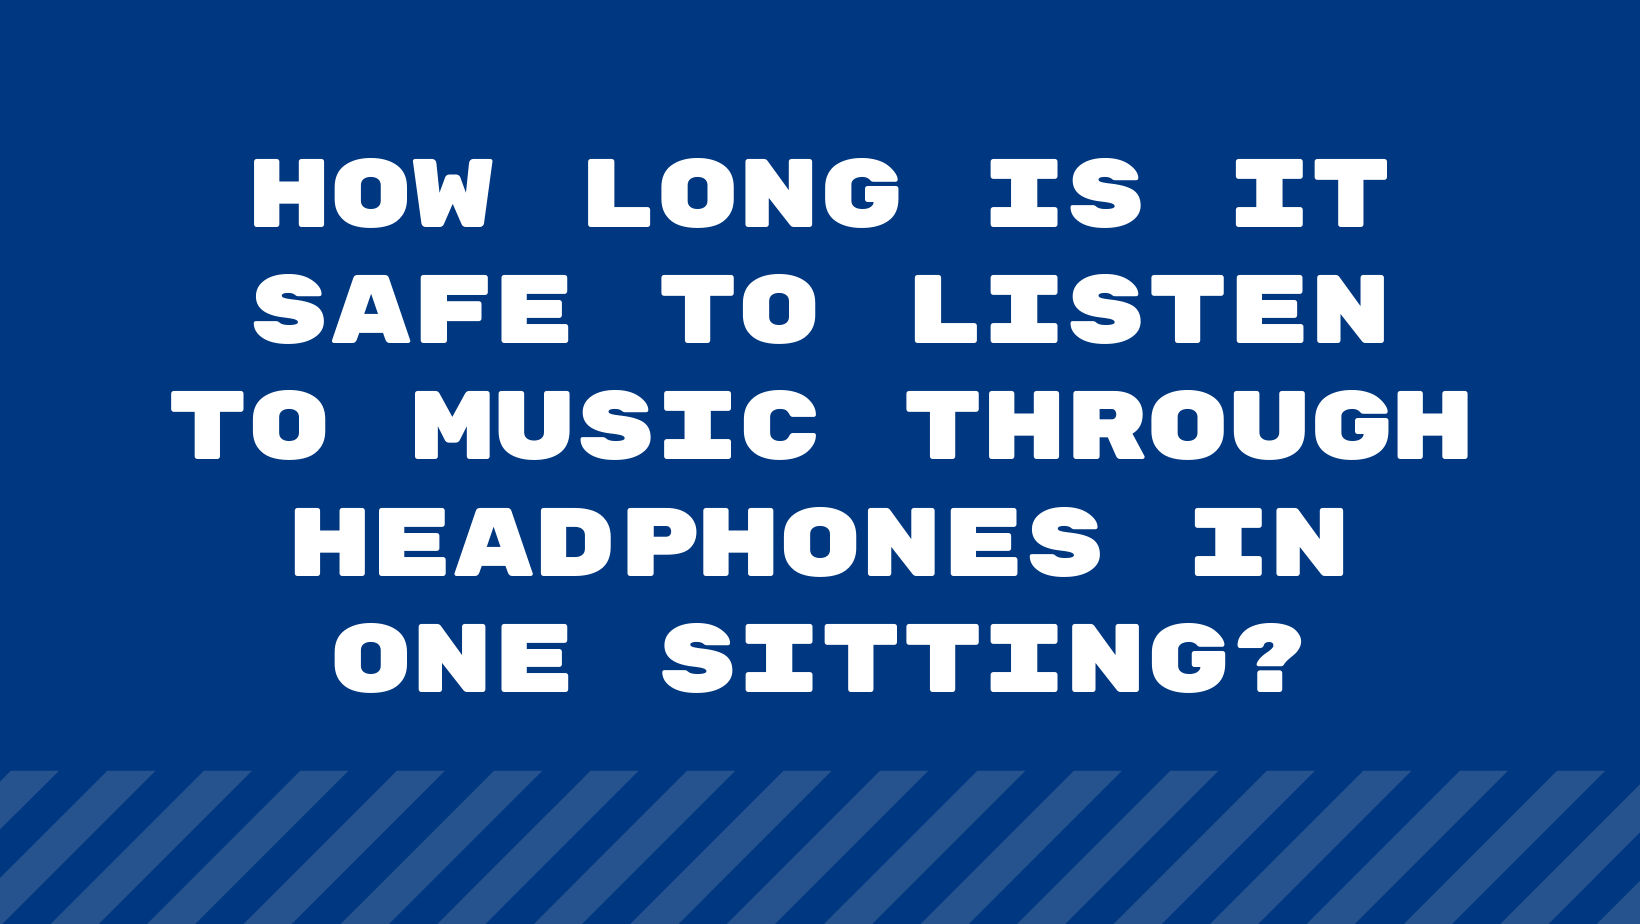 How Long Is It Safe To Listen To Music Through Headphones In One Sitting